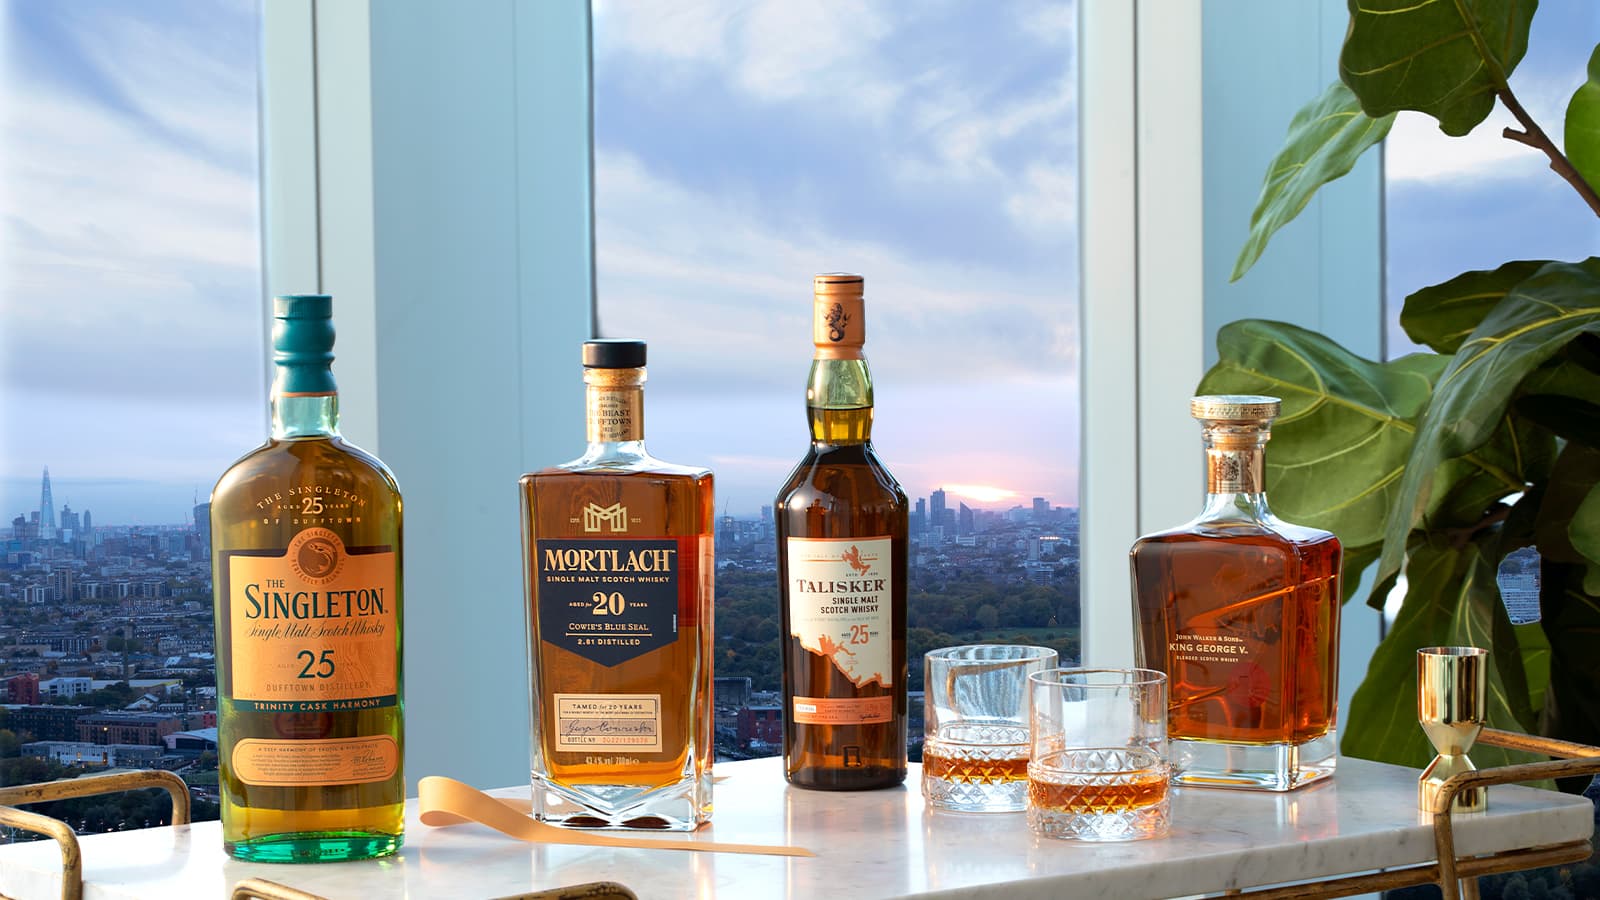 The most exceptional whiskies merit serious exploration